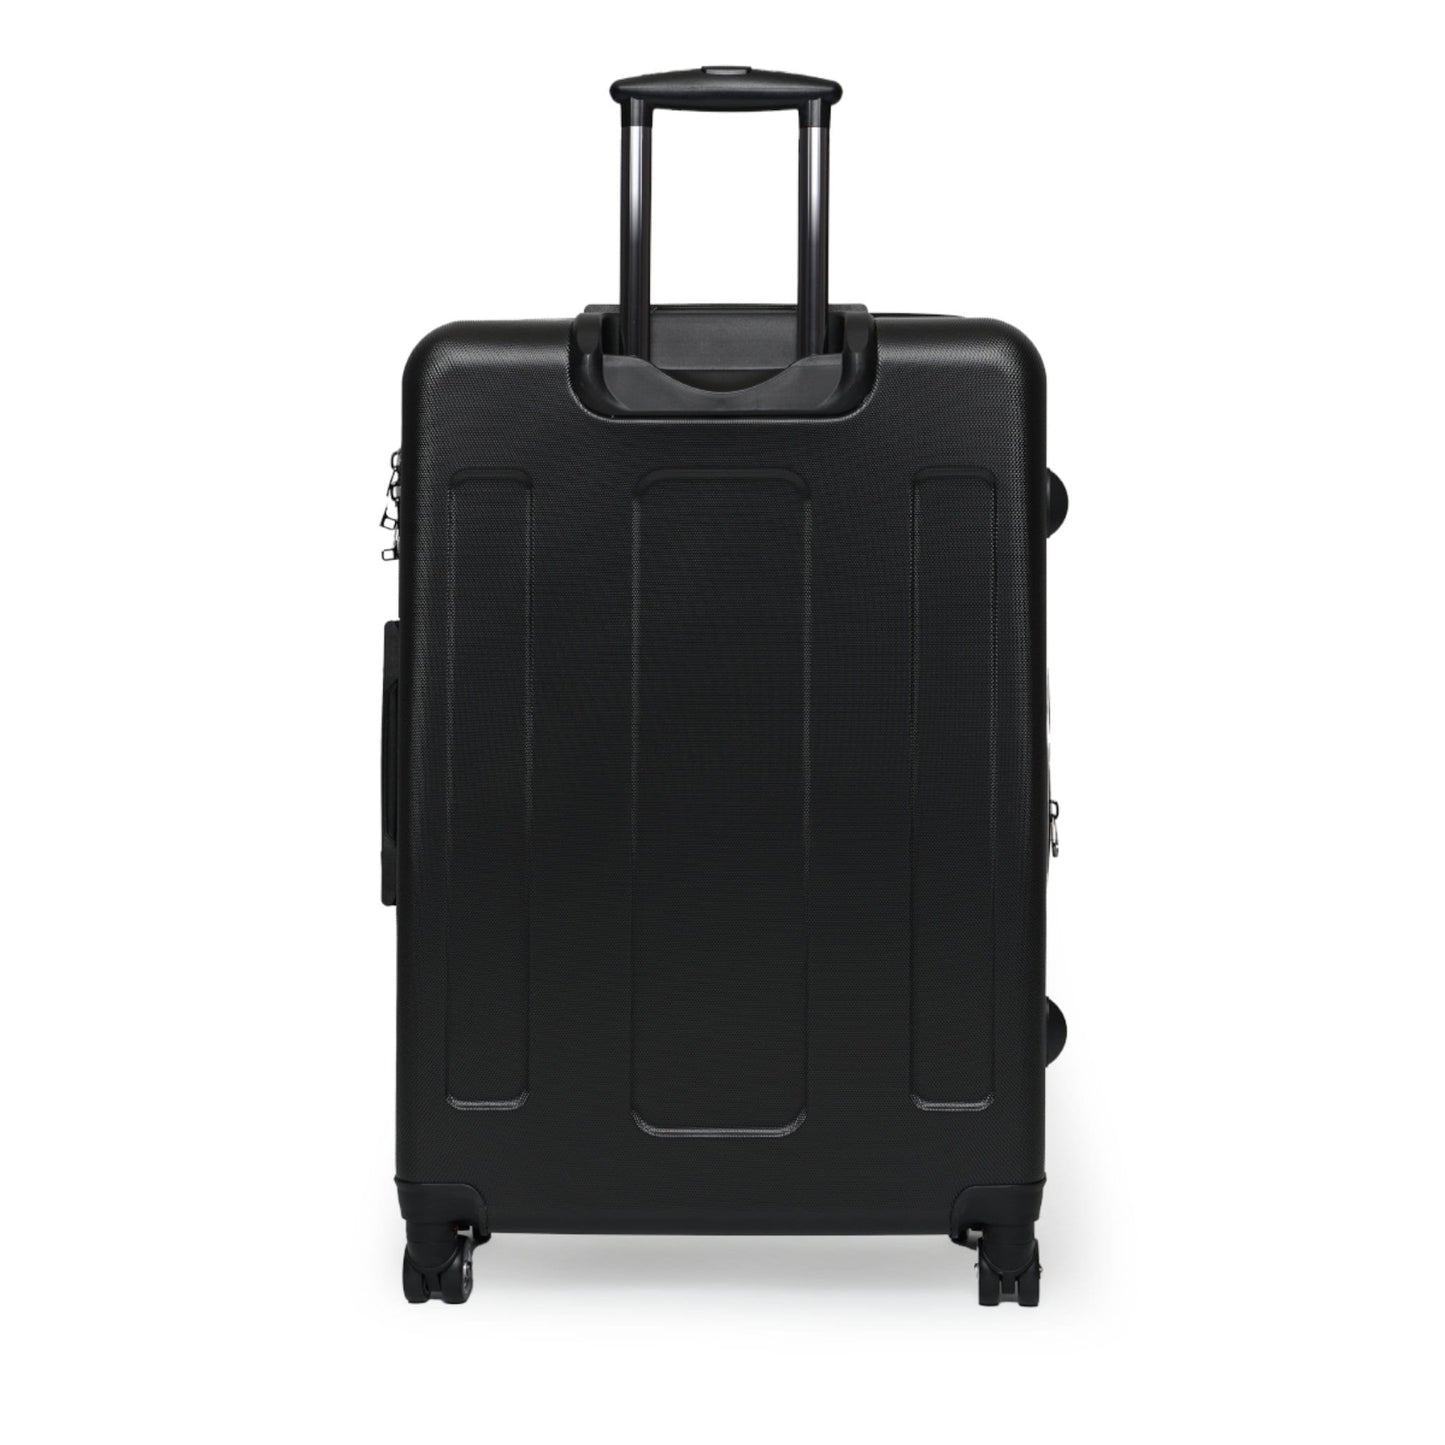 Suitcase - suitcases - large suitcase - carry on suitcase - luggage - airport - suitcase with wheels  - carry on luggage - gifts for men